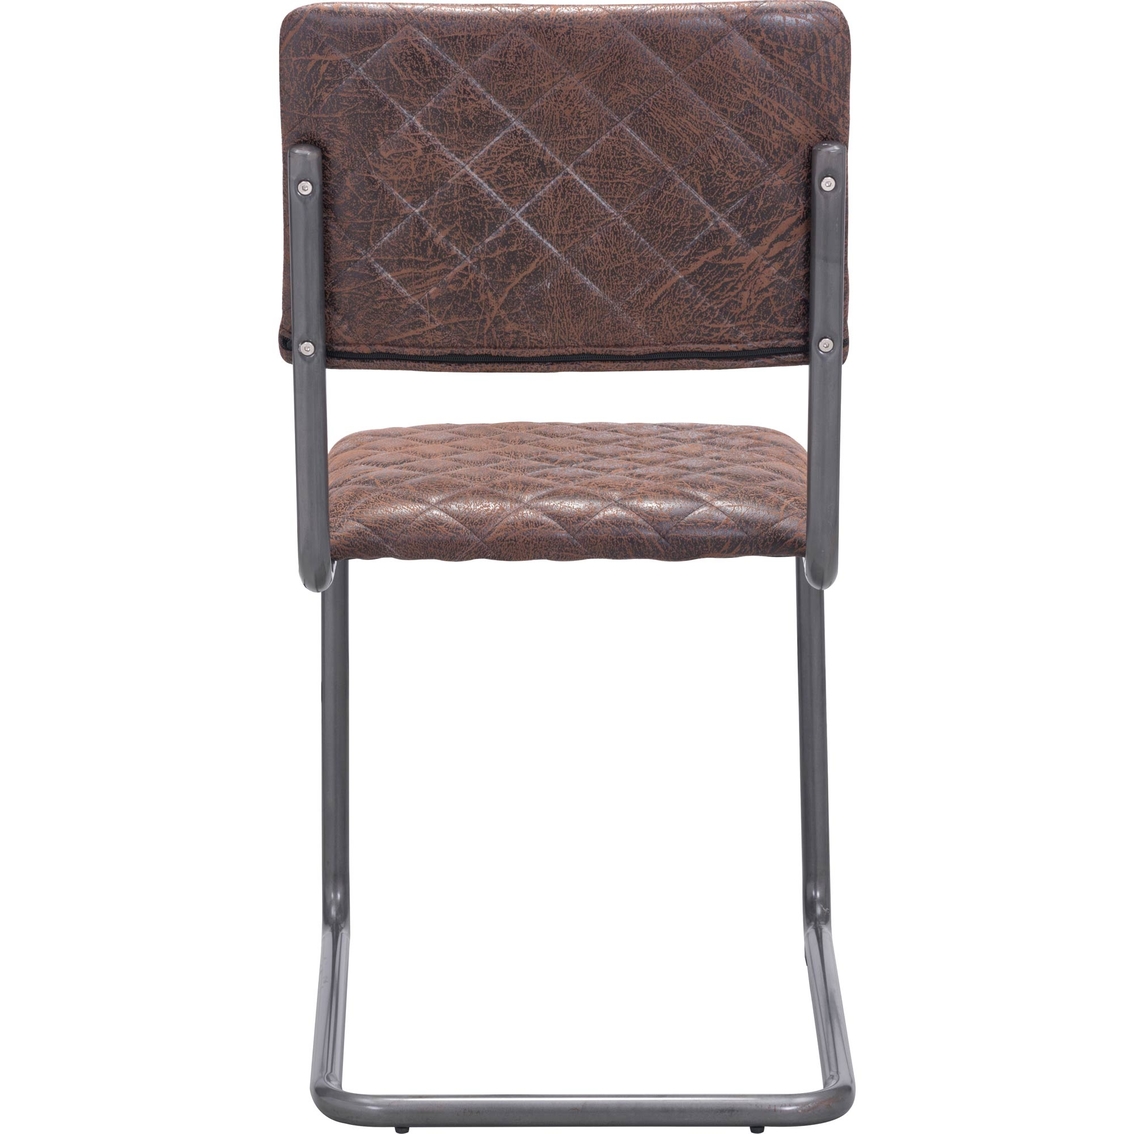 Zuo Modern Father Dining Chair Vintage Brown (Set of 2) - Image 3 of 4